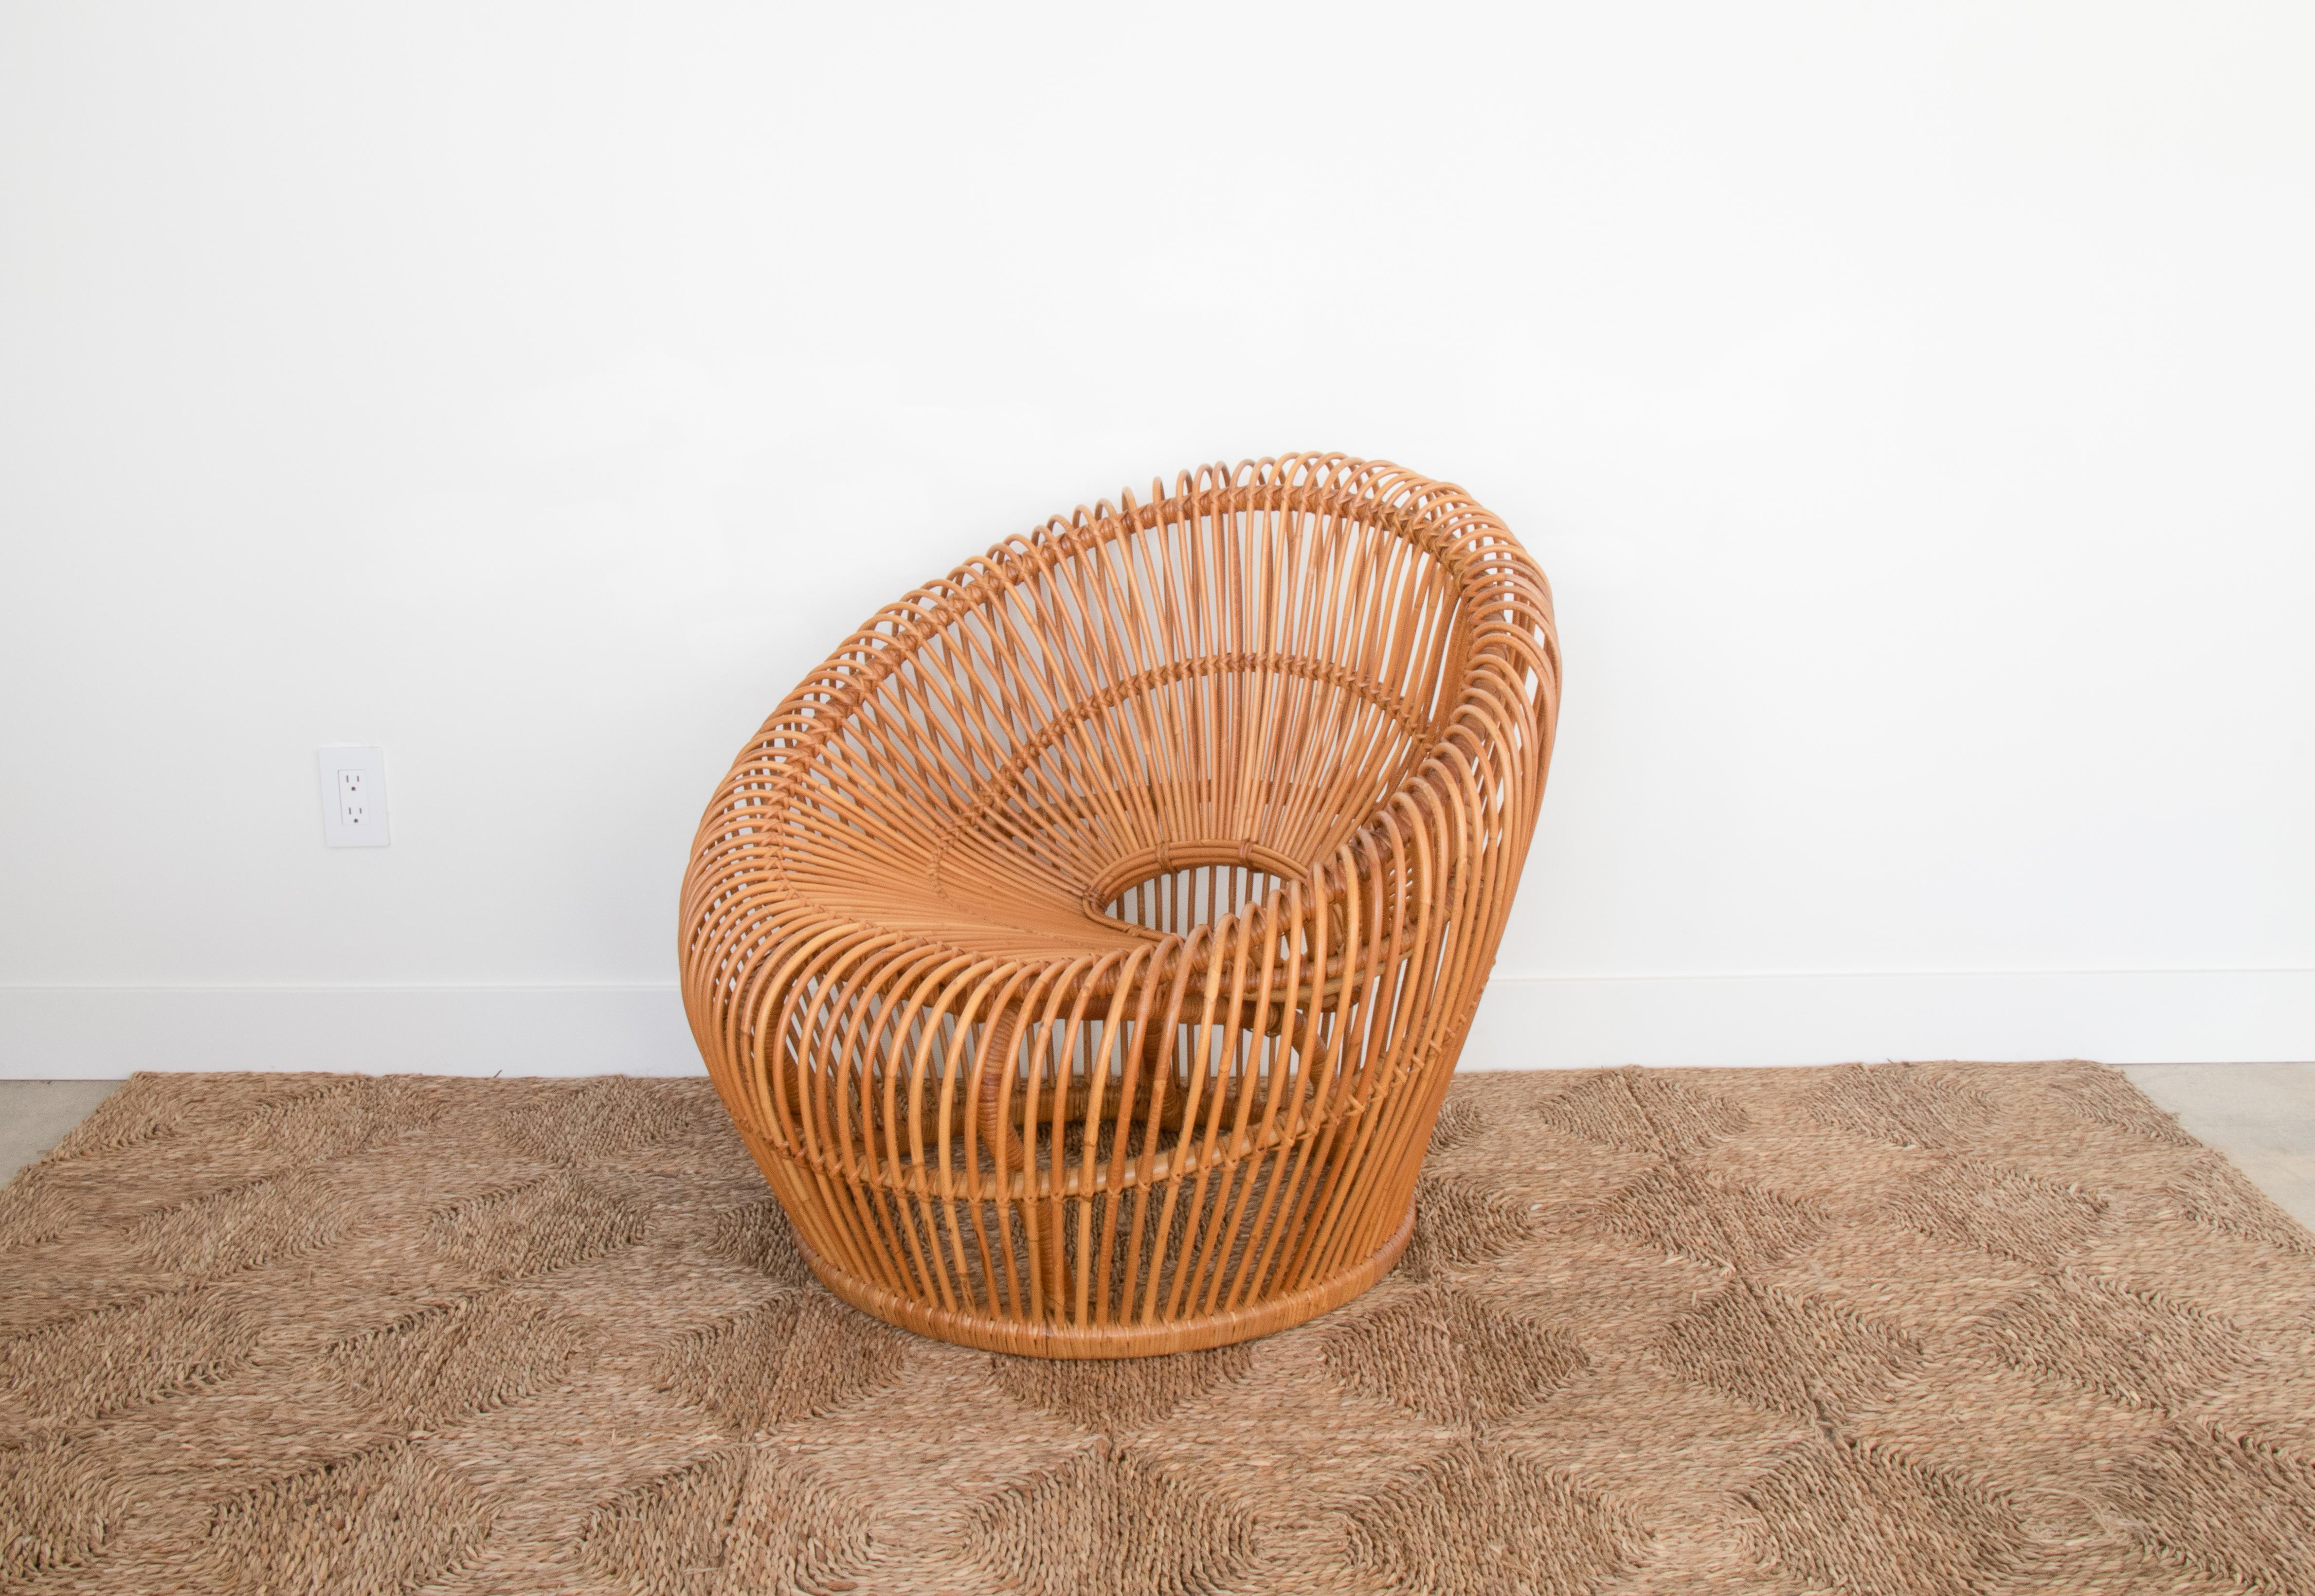 Large rattan bucket chair in the style of Franco Albini. Curved rattan with small open back and deep seat, making the chair very comfortable. Beautiful statement chair. 2nd similar chair also available.